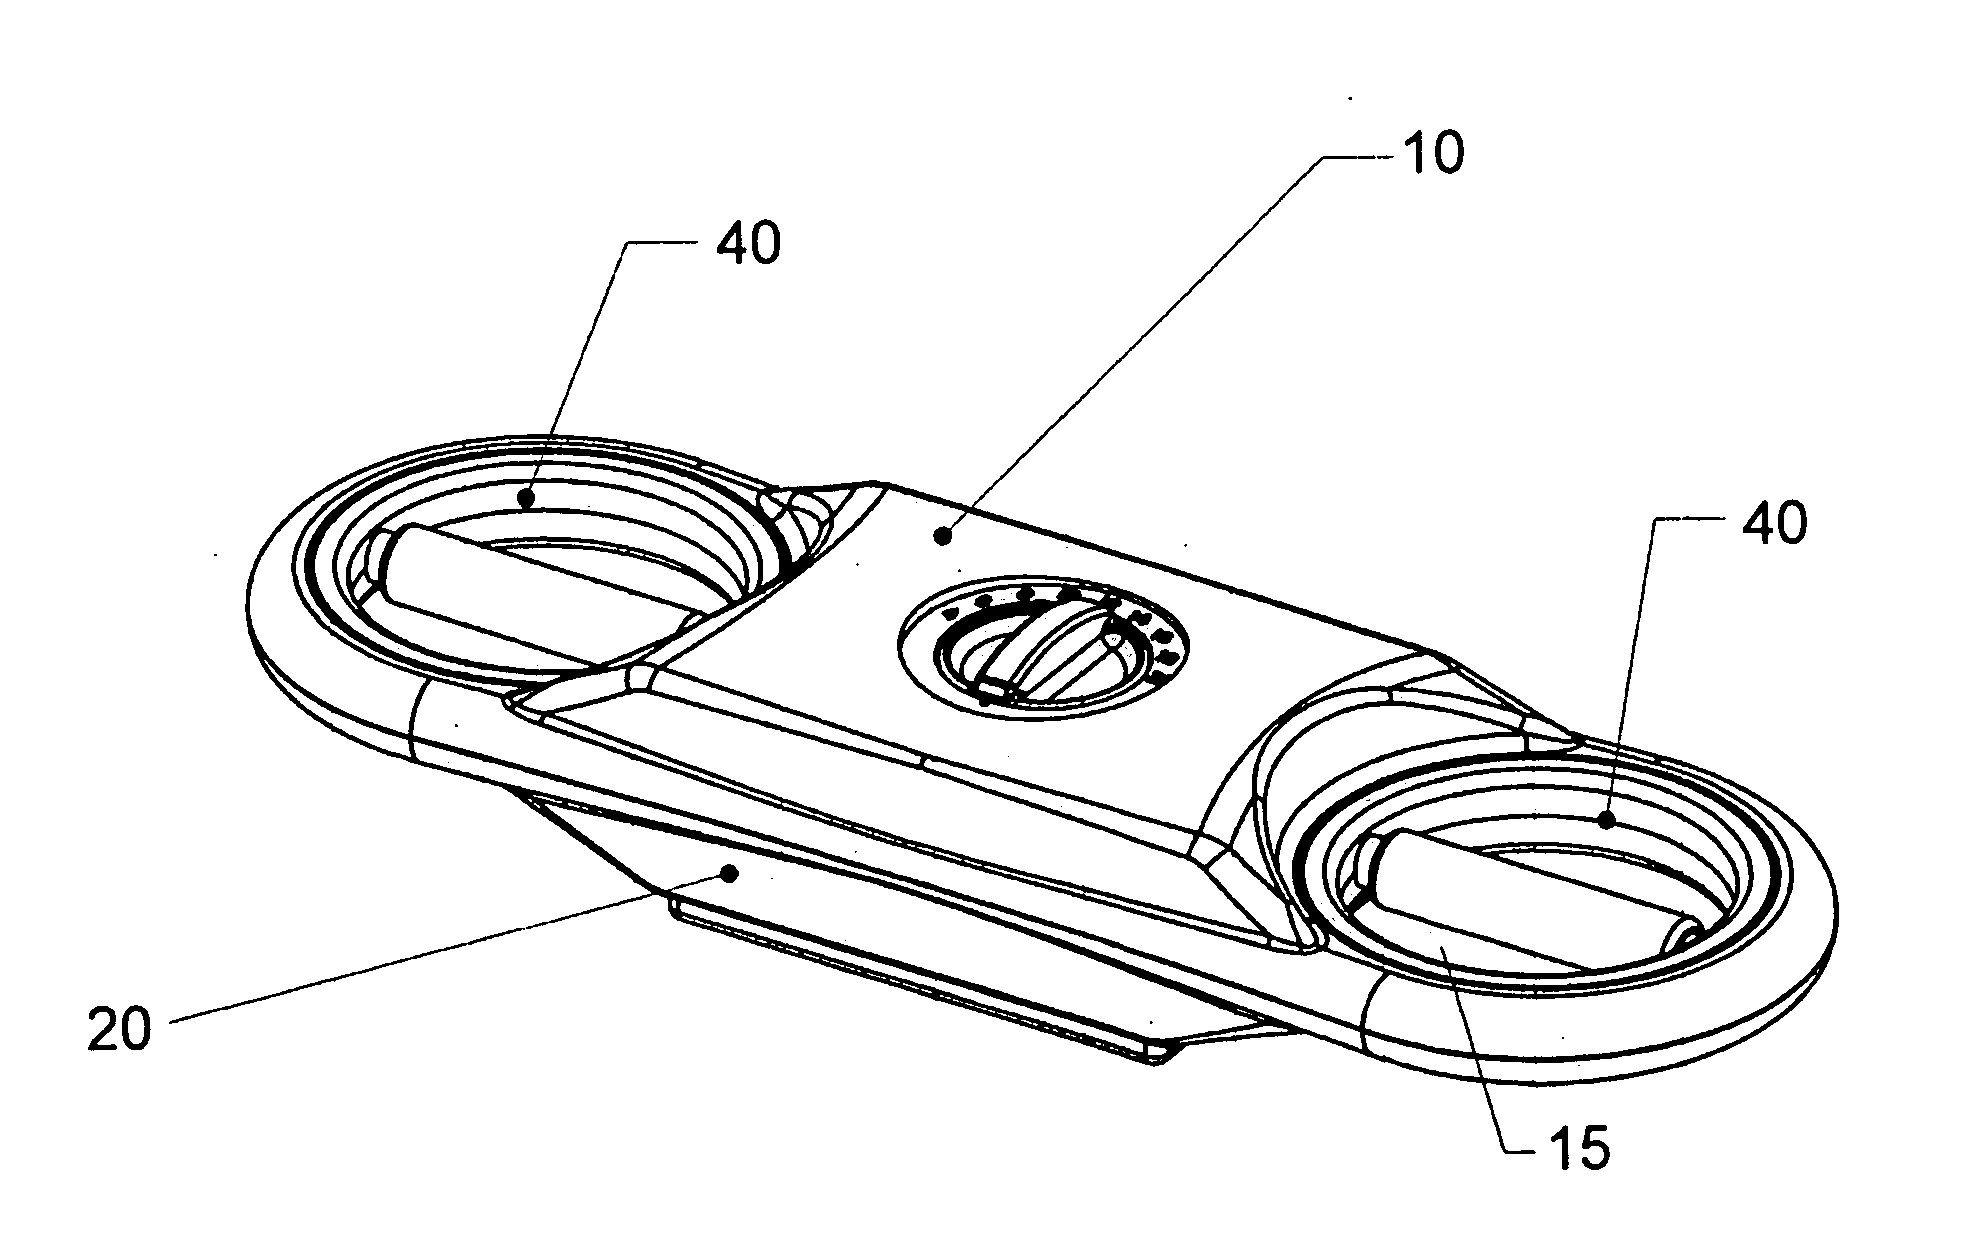 Exercise device, method of fabricating exercise device, and method and system for interaction with an exercise device